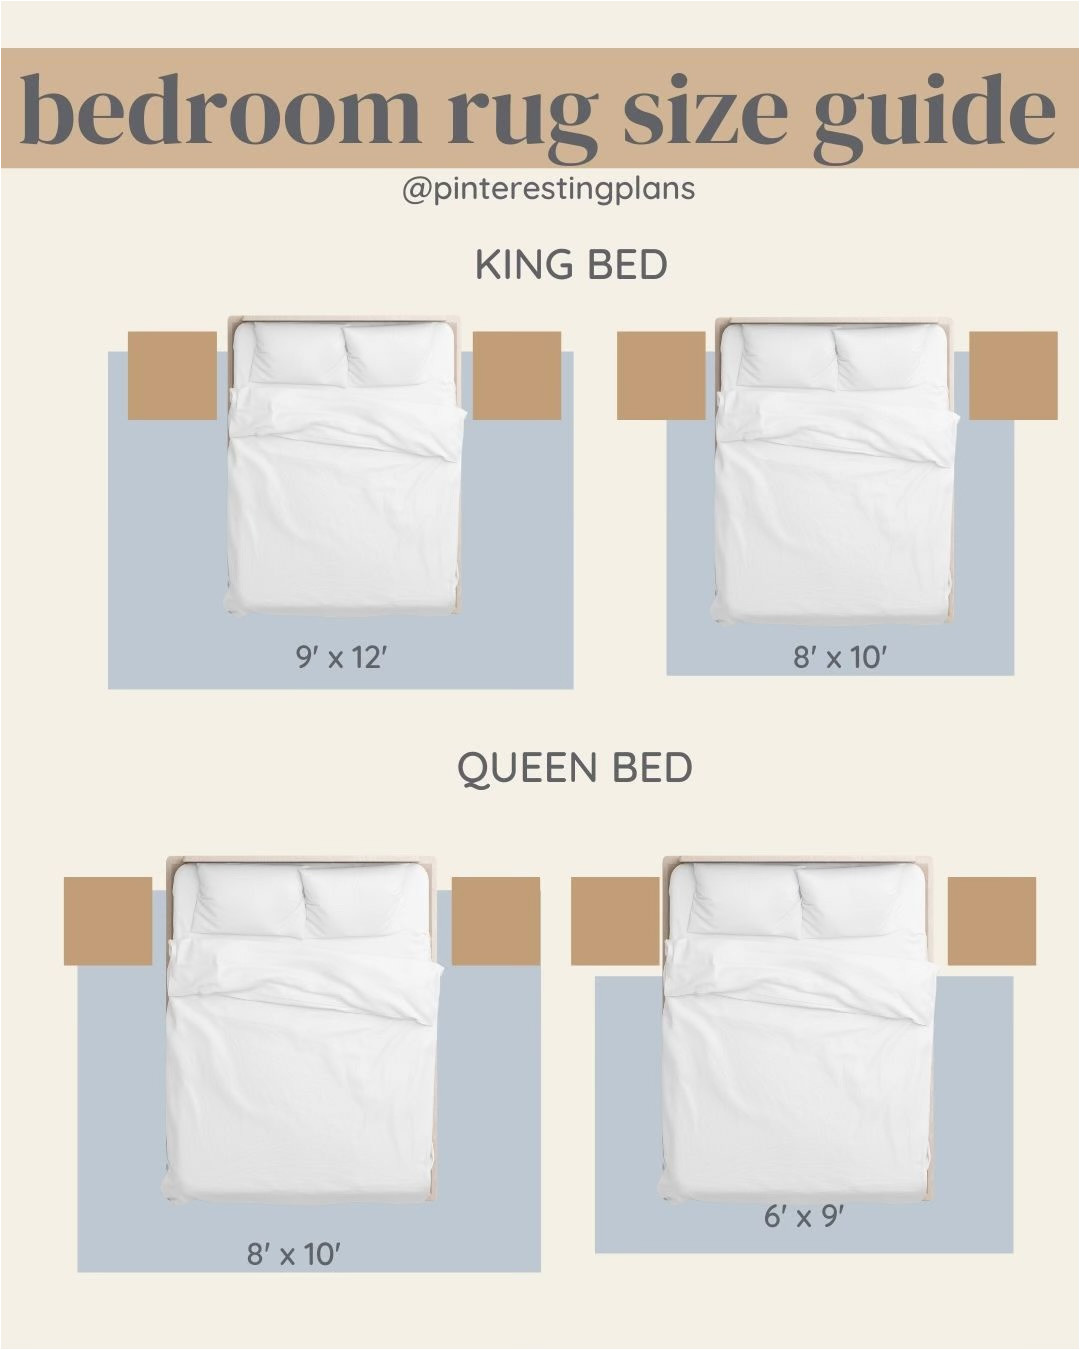 King Size Bed area Rug How to Choose the Right Rug Size for Your Bedroom – Pinteresting Plans